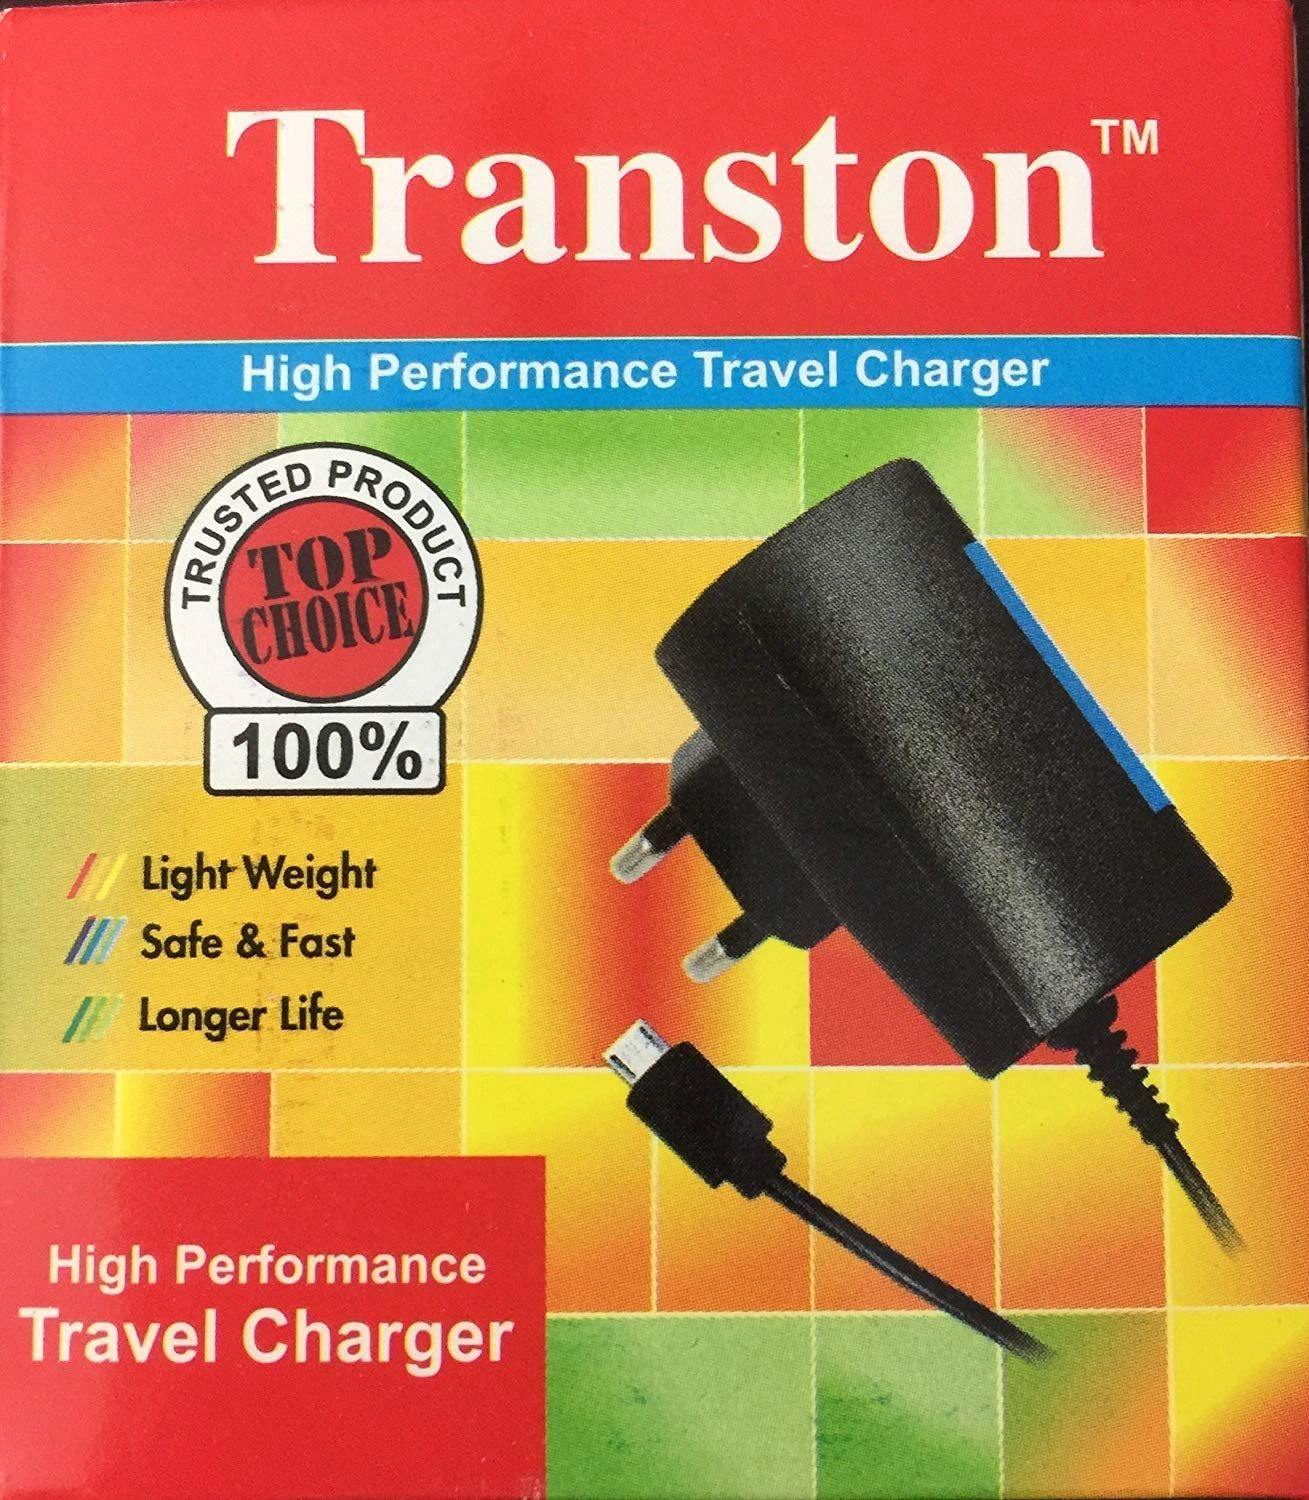 Transton Nokia Big Pin Charger for Nokia Basic Phones Premium Quality Charger-Chargers-dealsplant